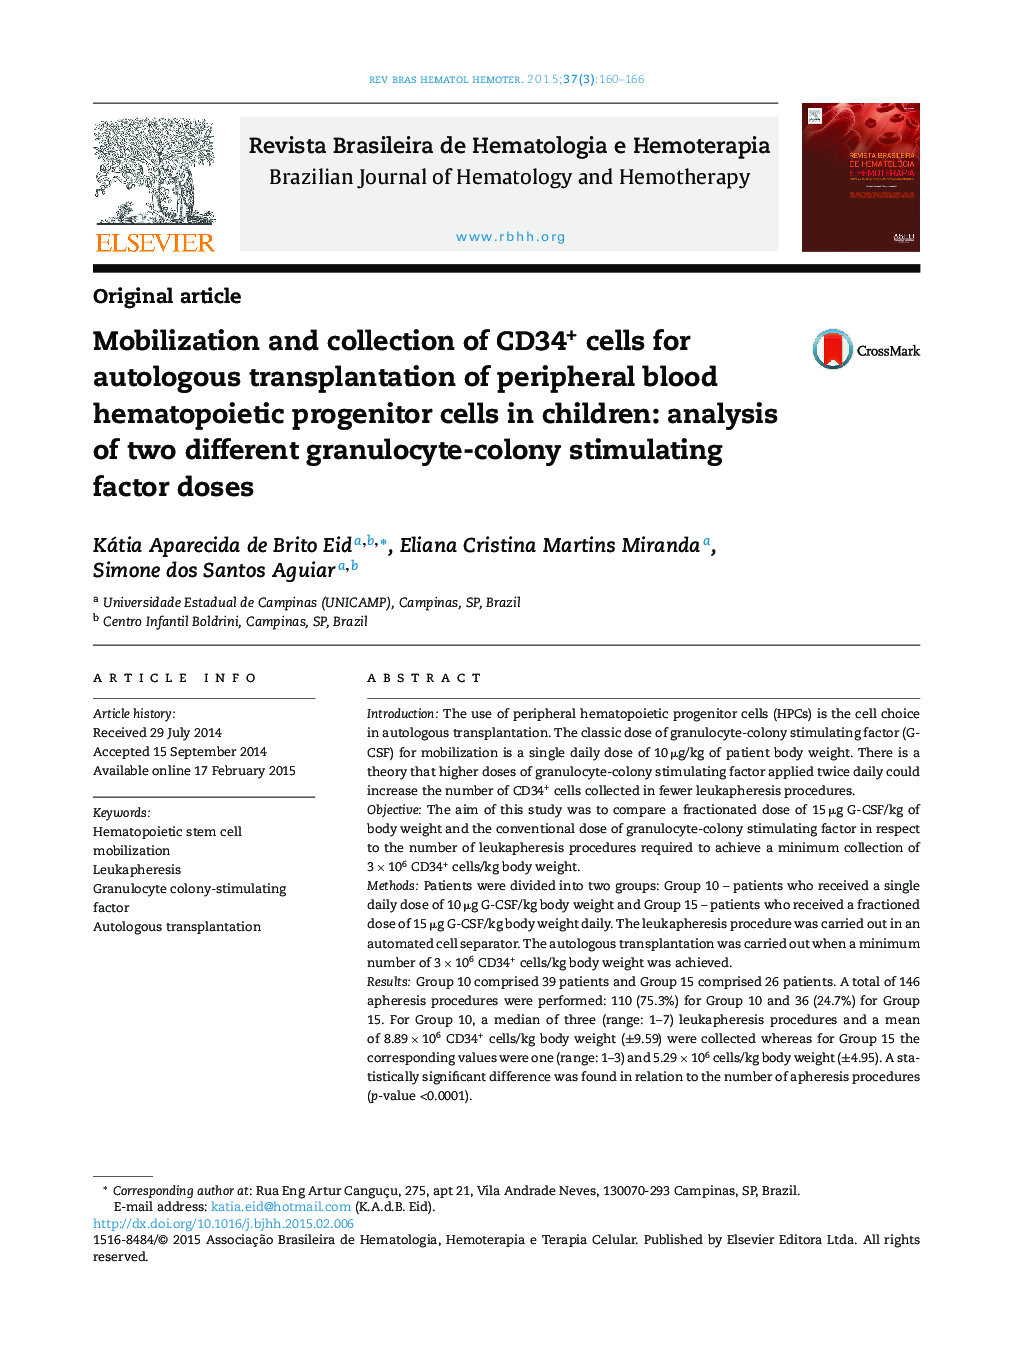 Mobilization and collection of CD34+ cells for autologous transplantation of peripheral blood hematopoietic progenitor cells in children: analysis of two different granulocyte-colony stimulating factor doses